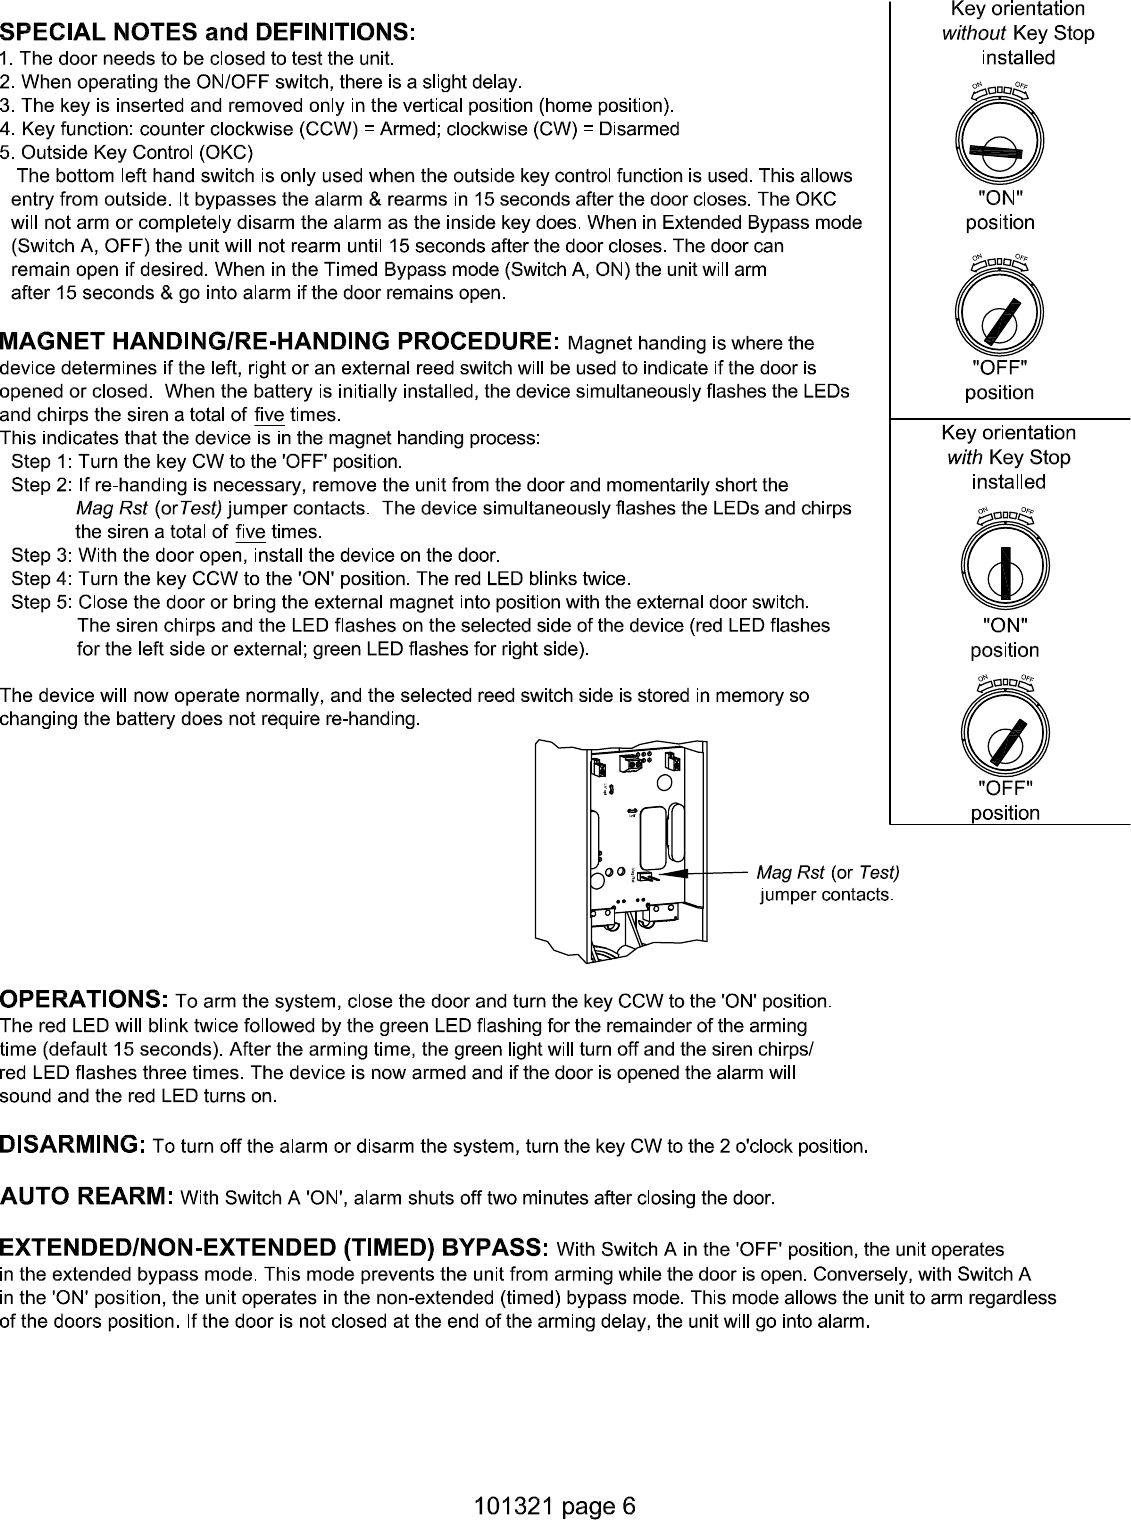 Page 6 of 7 - Detex  EAX-500 Installation Instructions 101321Press Quality